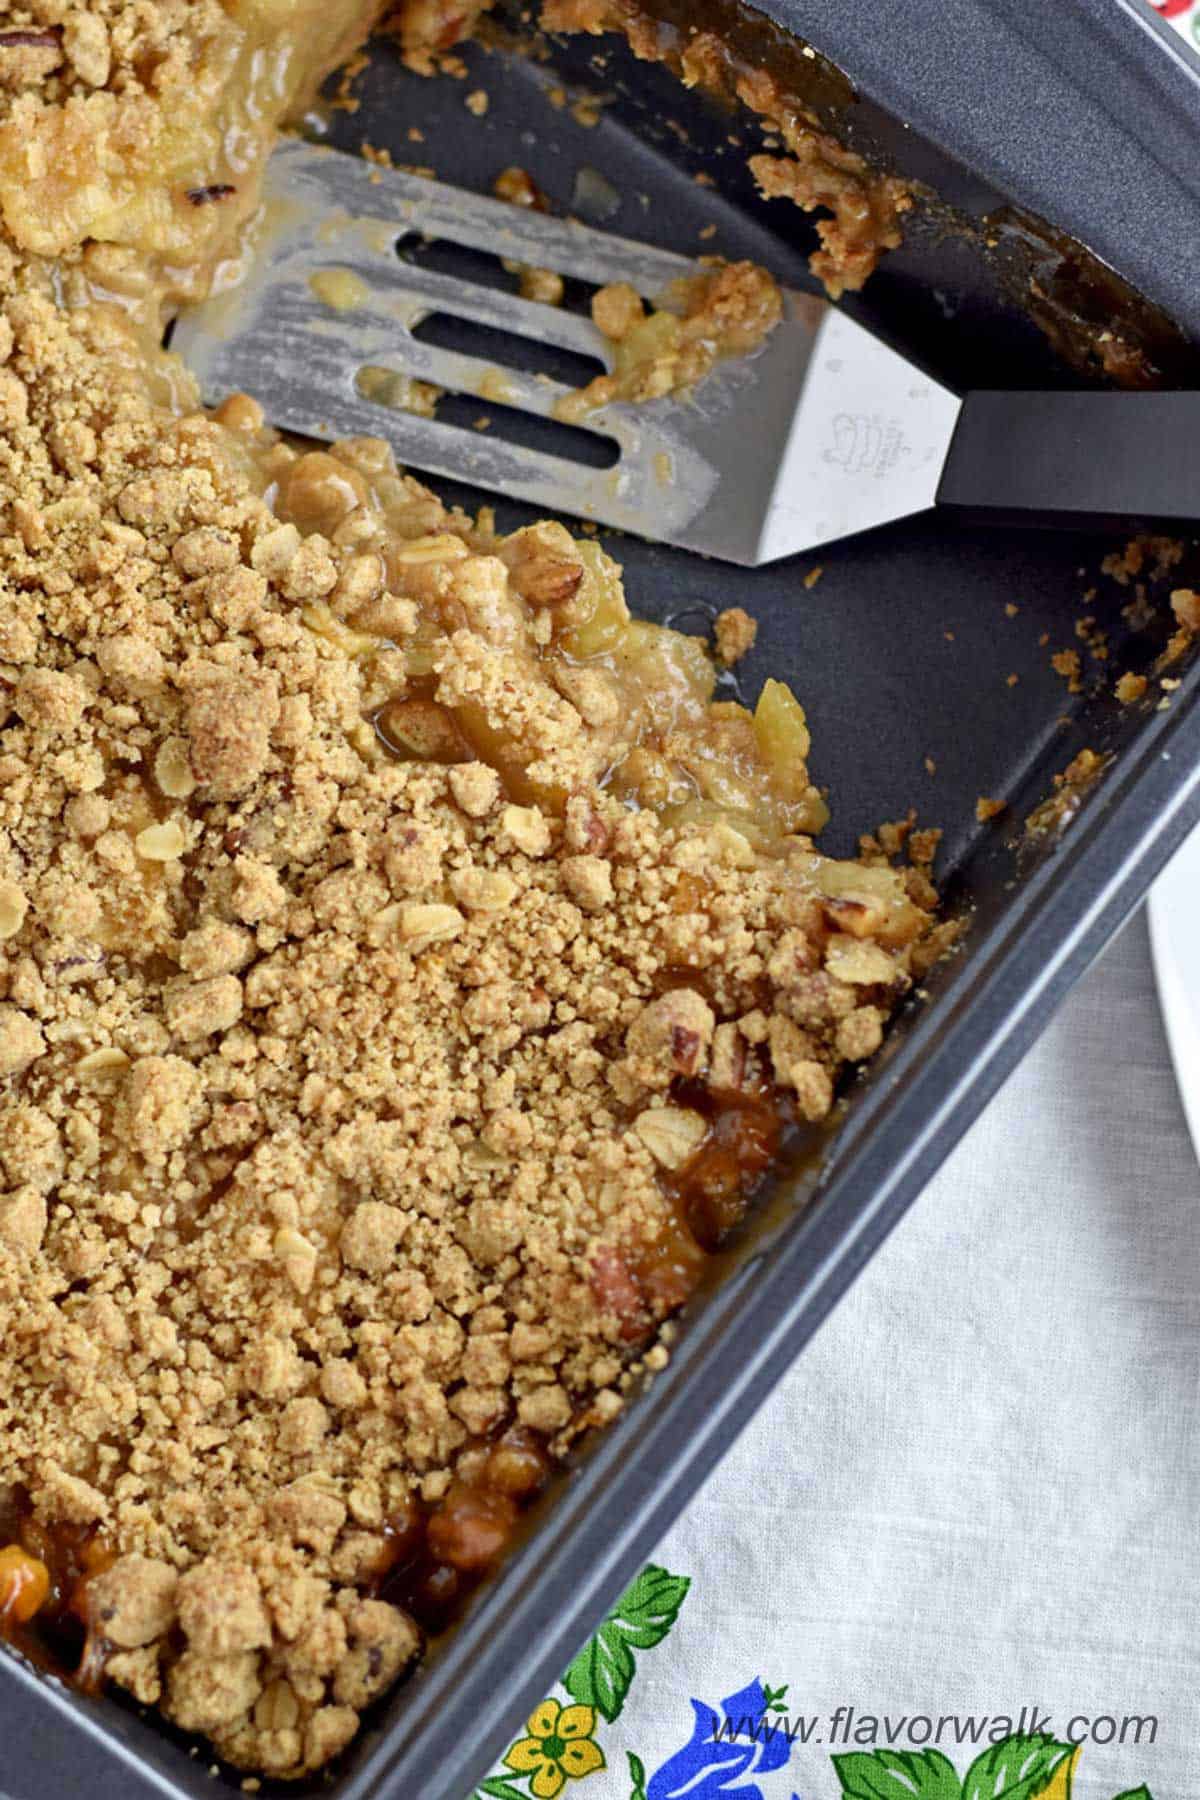 Gluten free apple dessert in a baking pan, with two servings removed, and a metal server.